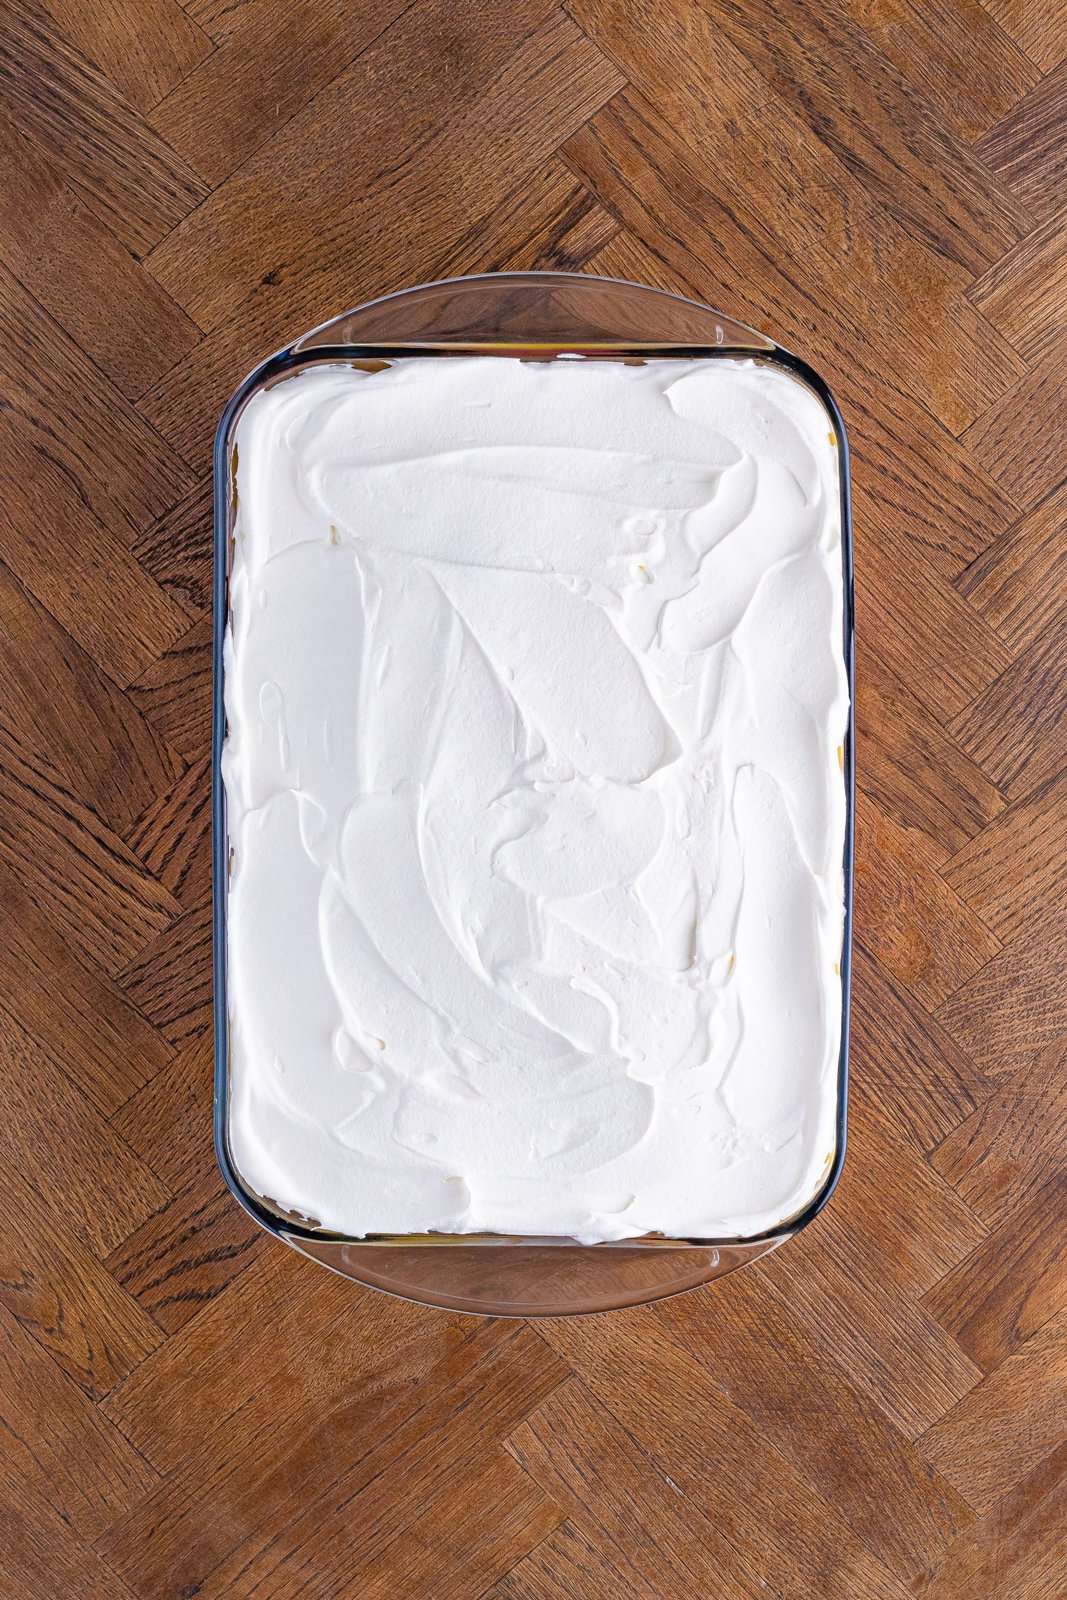 A Cool Whip layer smoothed out over top of the dessert in a baking dish.